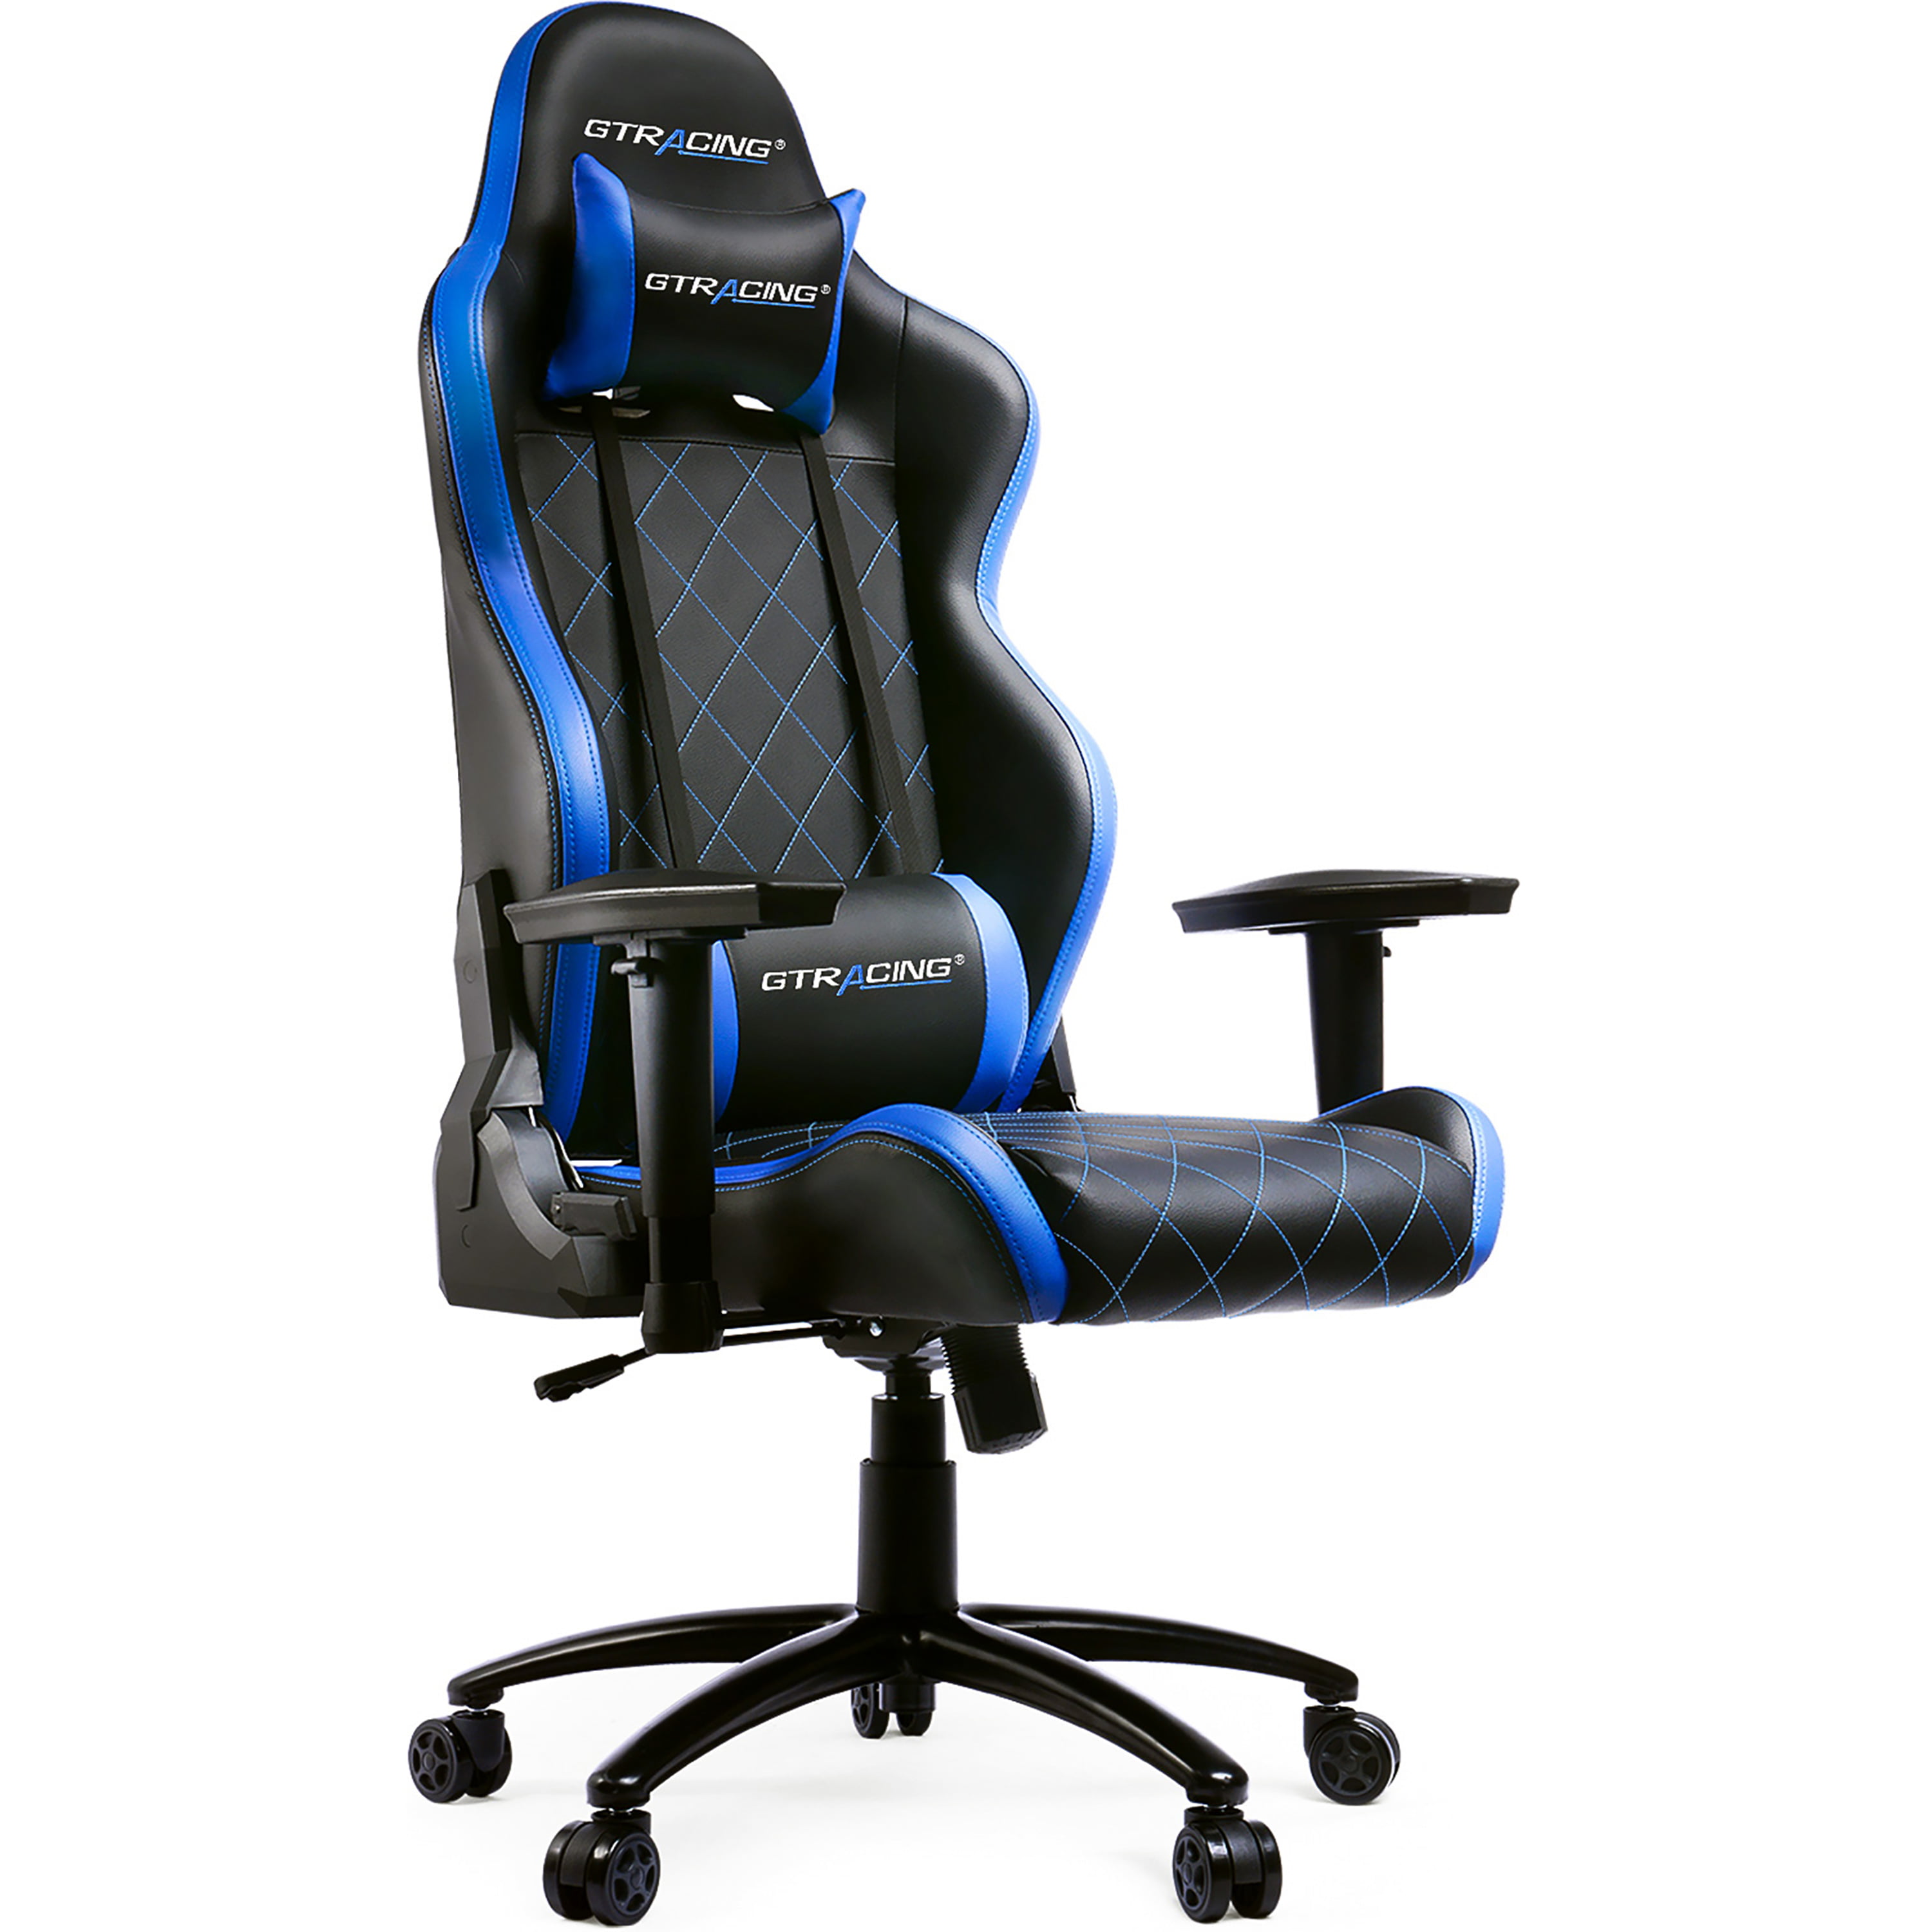 GTRacing Blue Executive Gaming Chair Luxury PU Leather High Back Office Desk US 